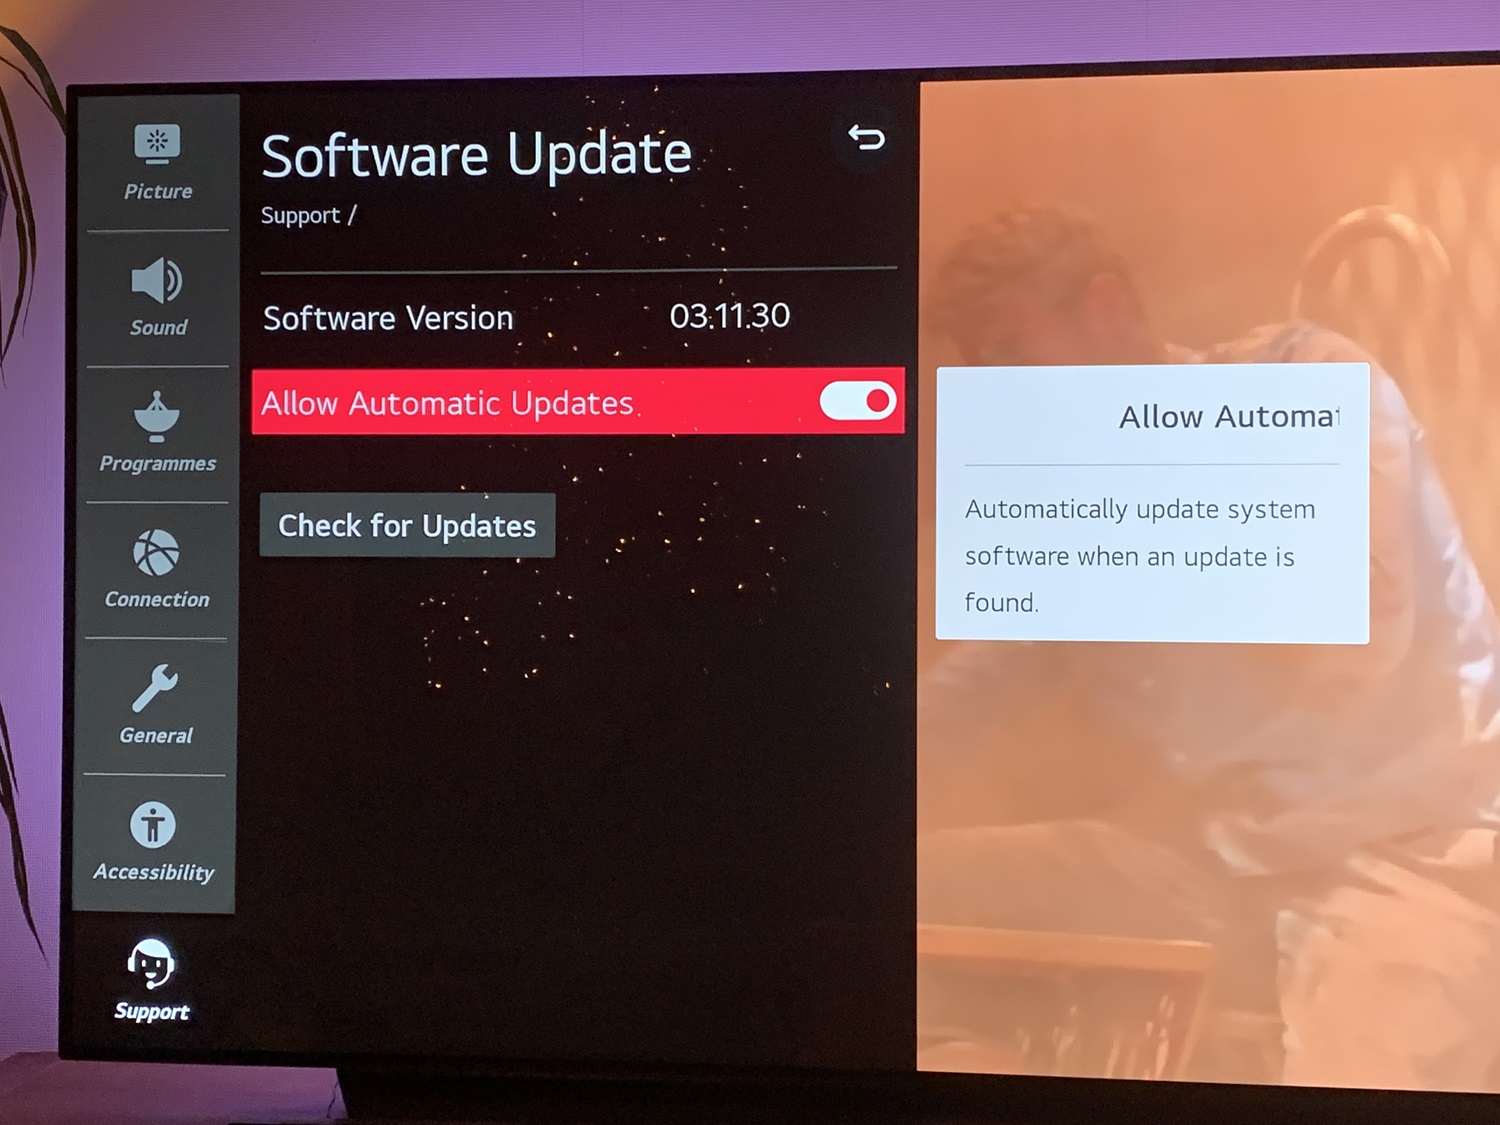 allow automatic update